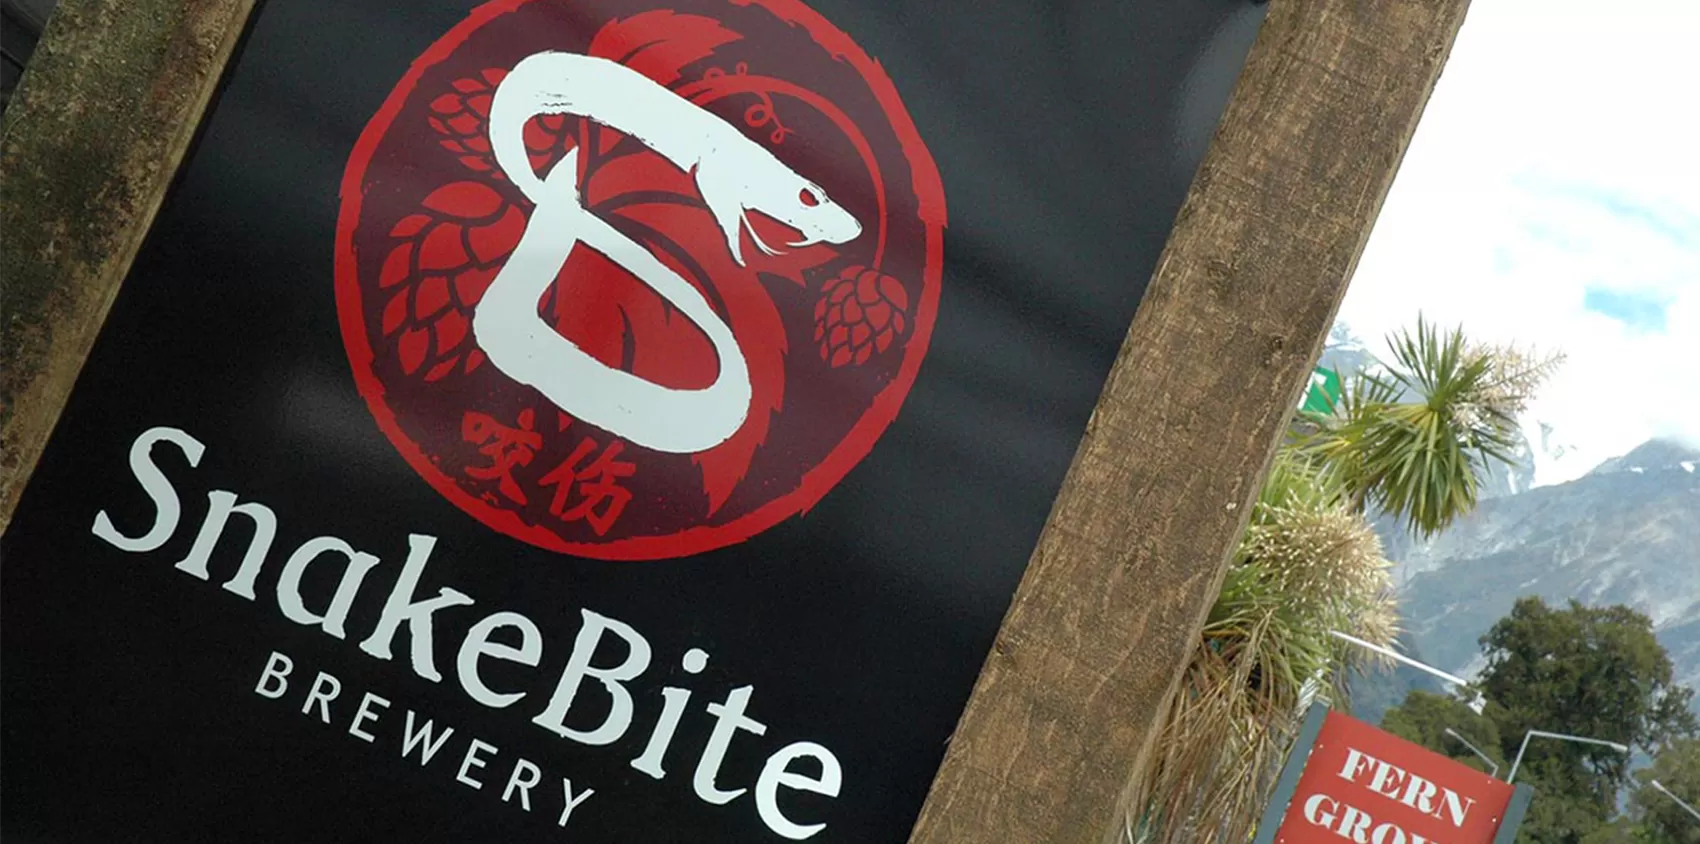 snakebite brewery activate design case study